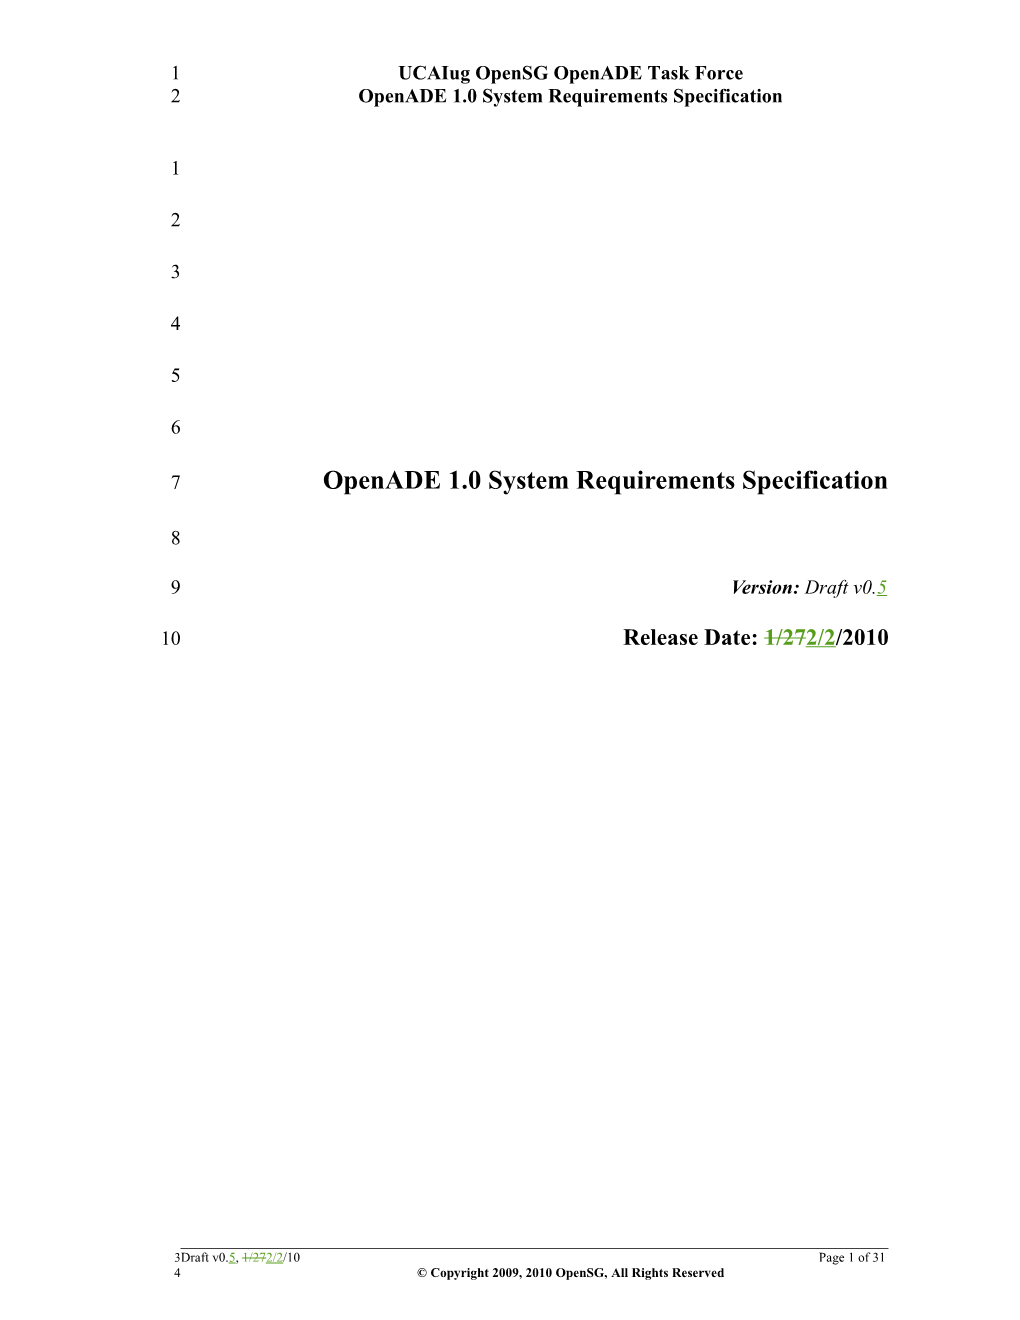 Openade 1.0 System Requirements Specification